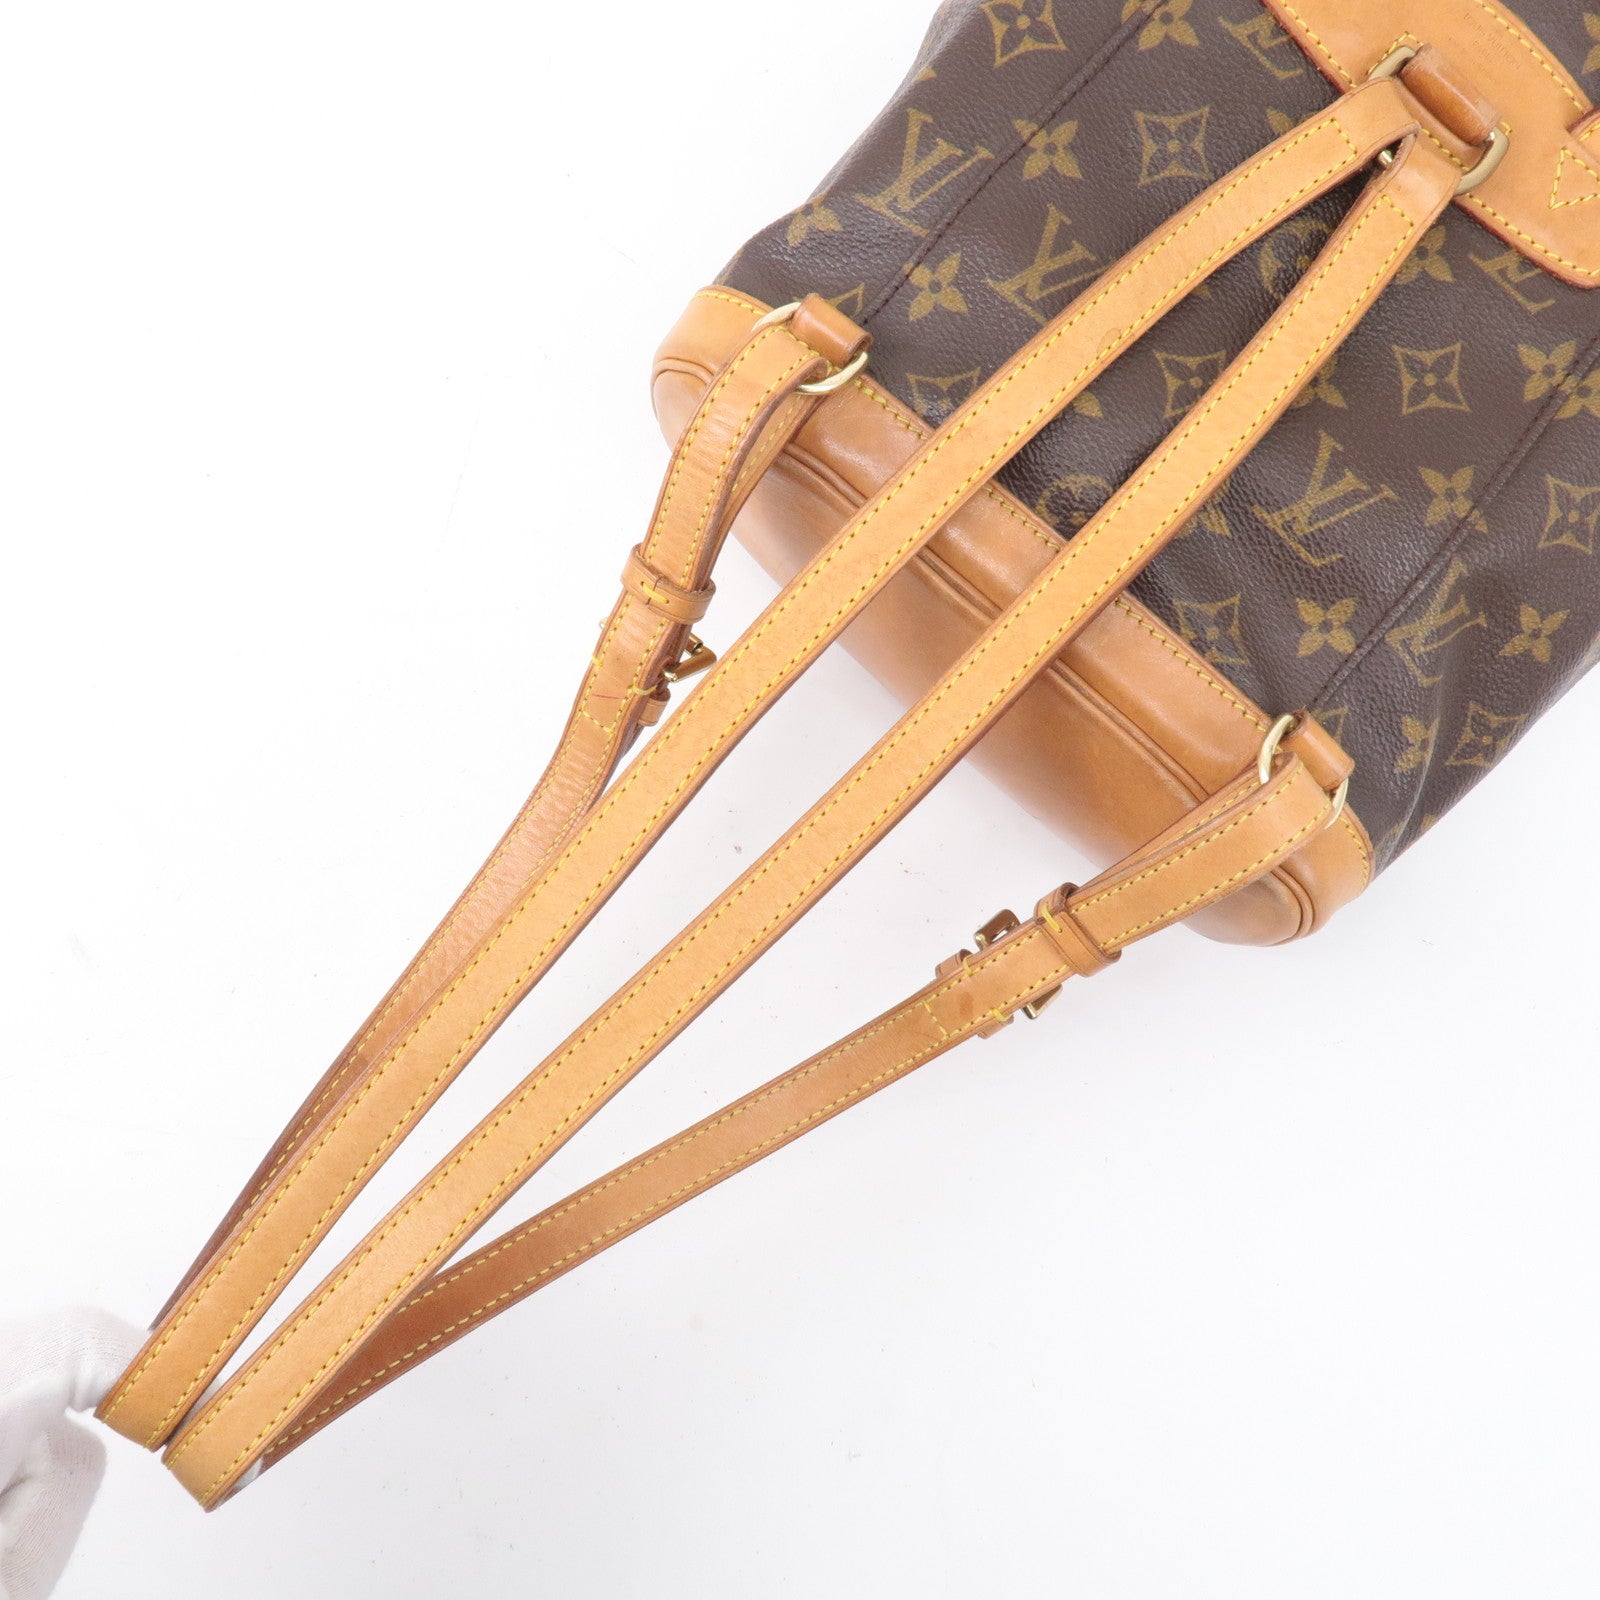 LOUIS VUITTON Mini Montsouris Backpack M51137｜Product  Code：2101213811853｜BRAND OFF Online Store